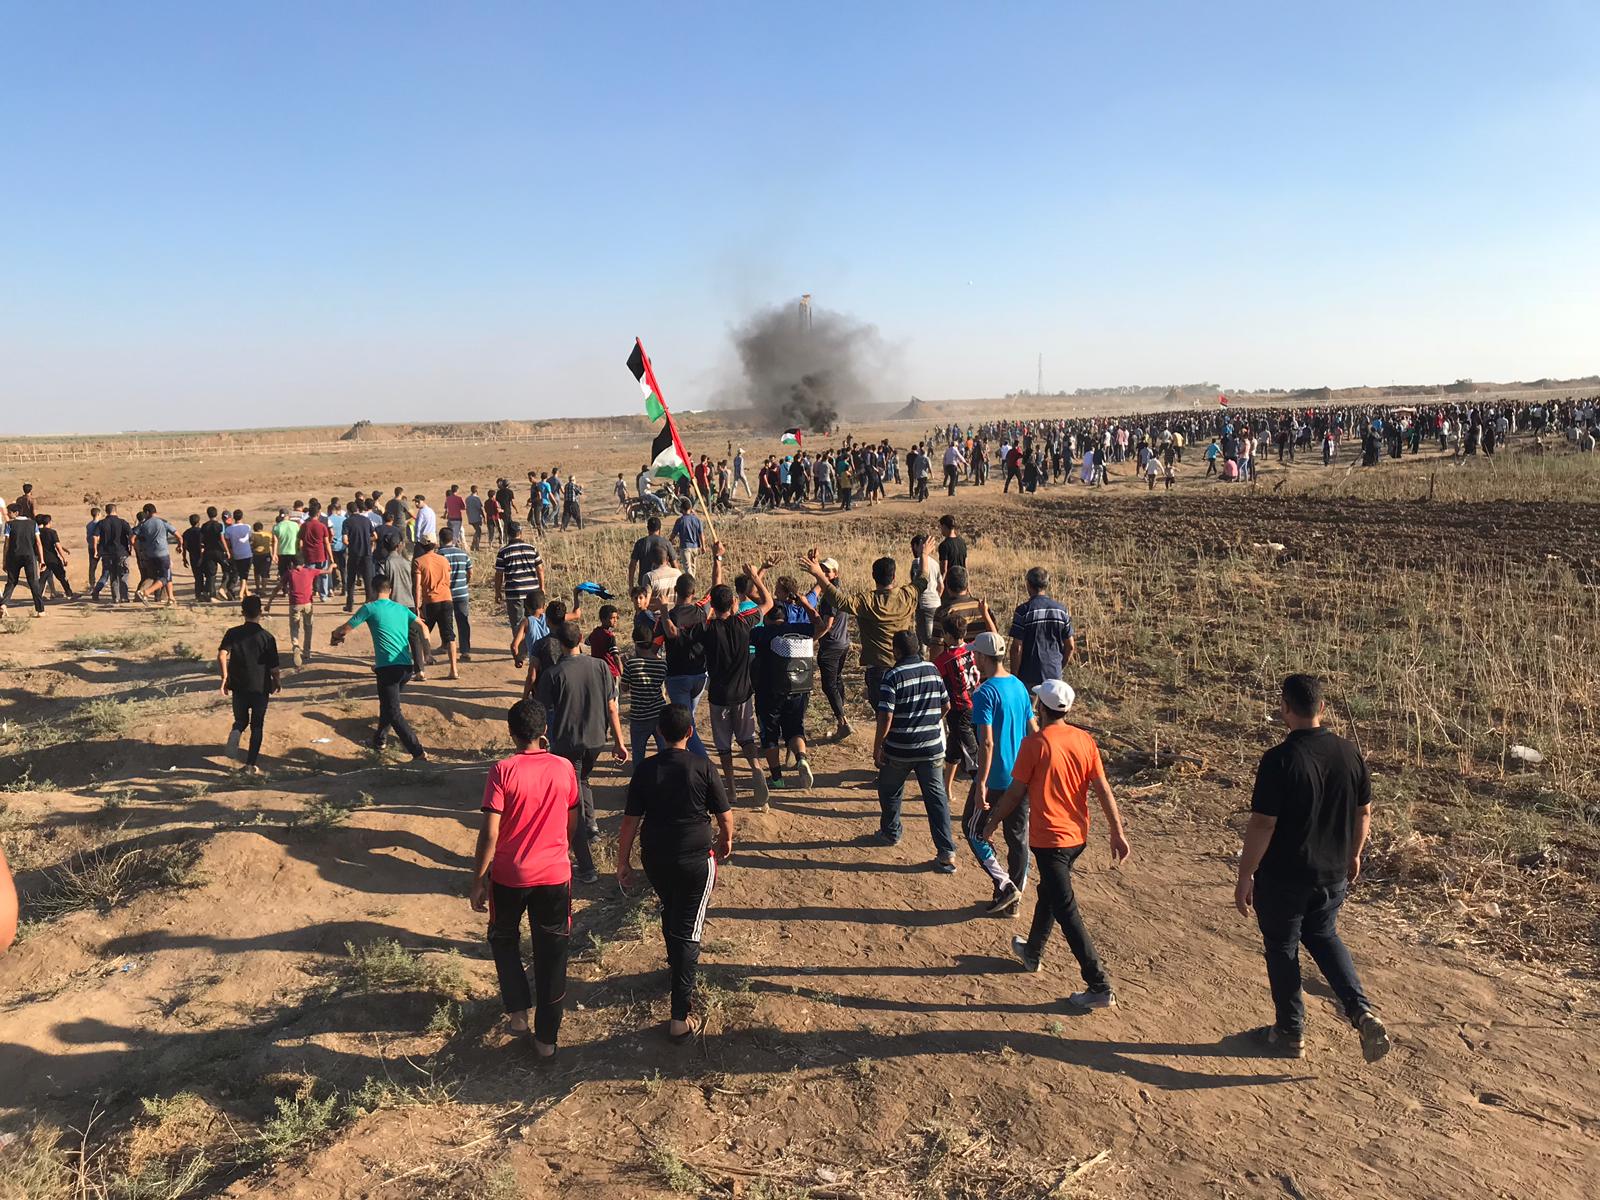 Israel kills Palestinian man, wounds hundreds others in Gaza